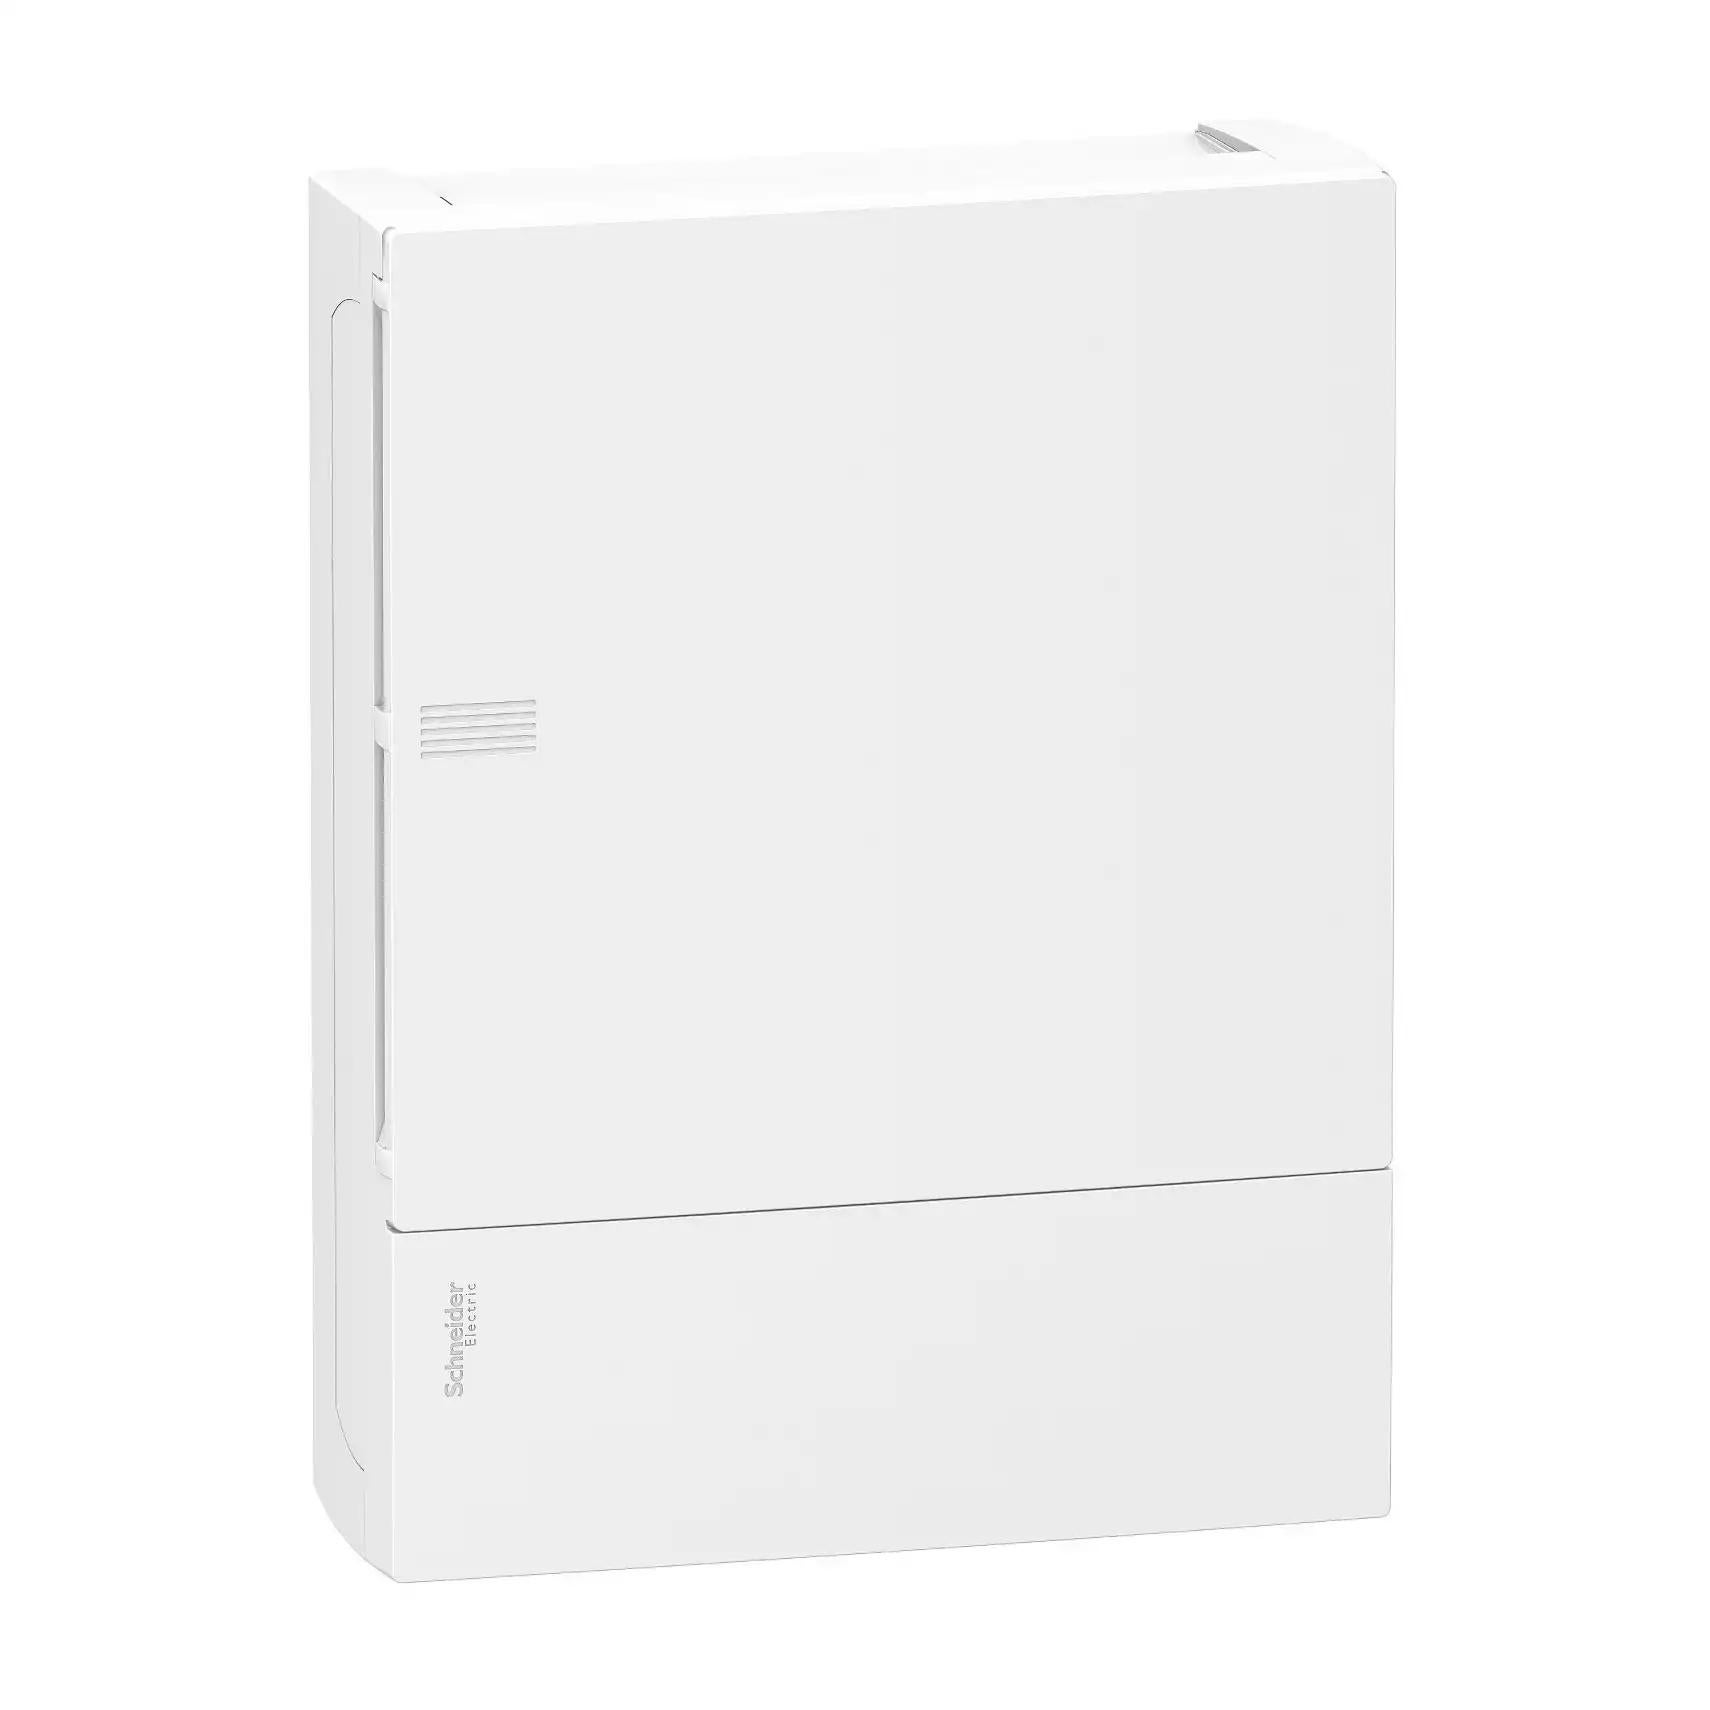 Enclosure, Resi9 MP, surface mounting, 2 rows of 12 modules, IP40, white door, 1 earth + 1 neutral terminal blocks